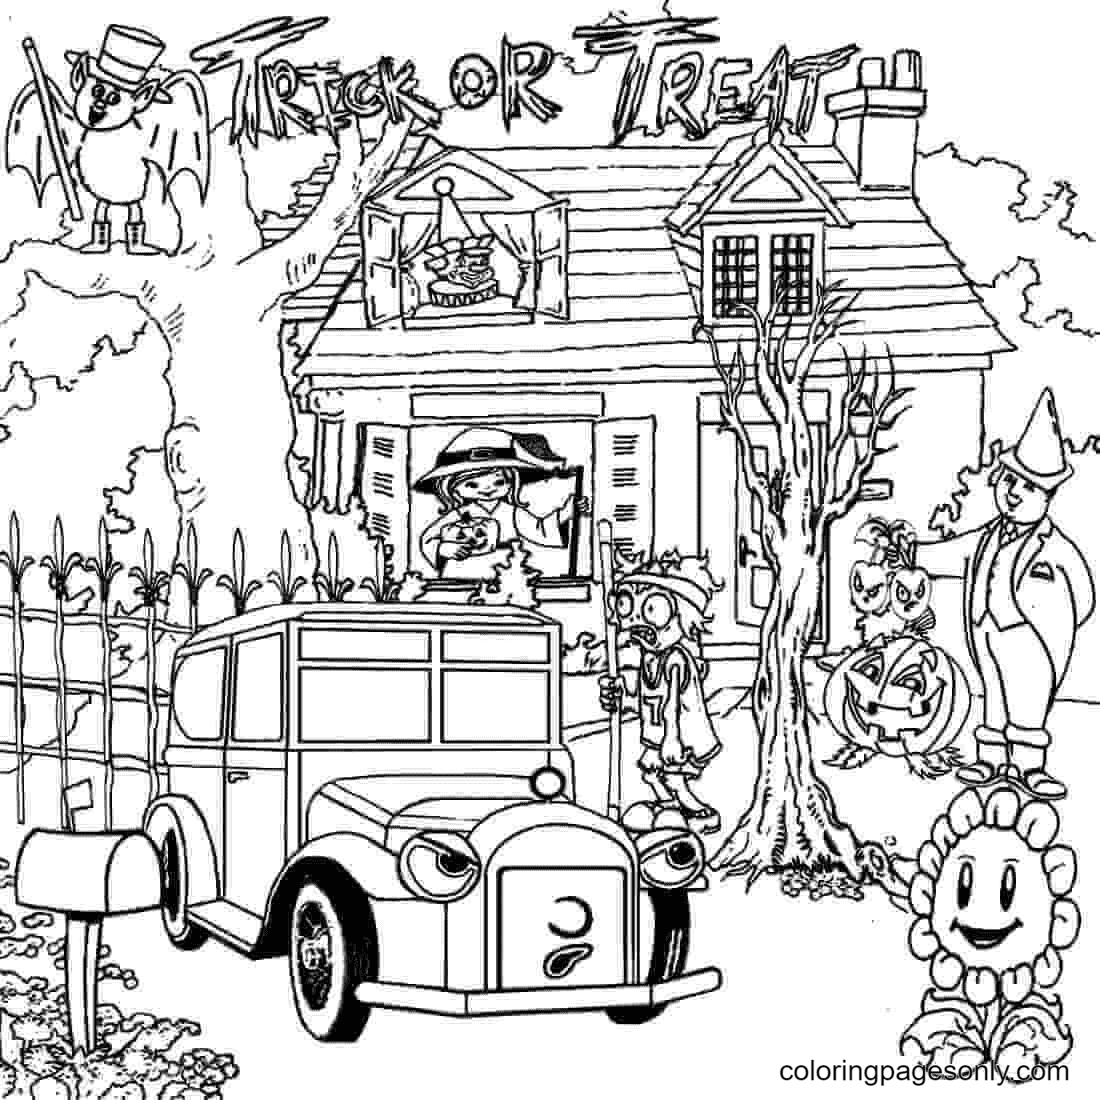 Trick or Treat Haunted House Coloring Page